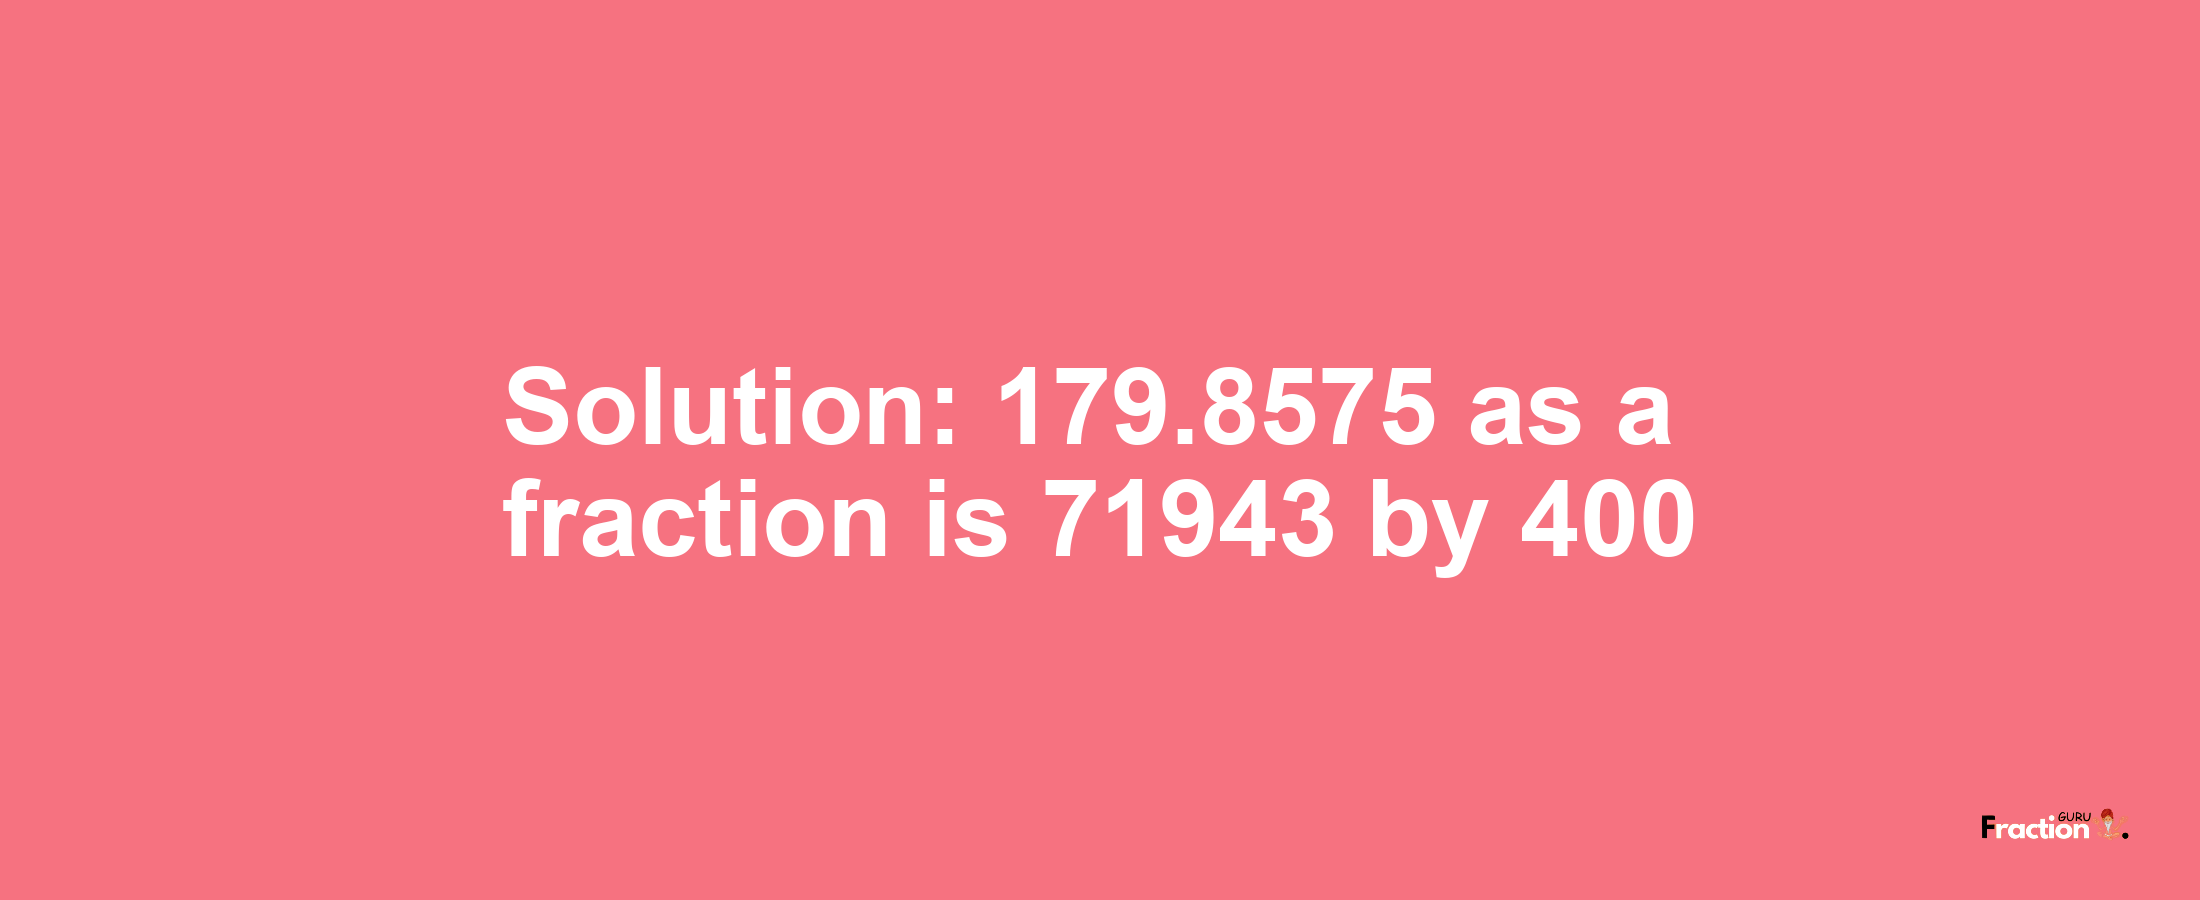 Solution:179.8575 as a fraction is 71943/400